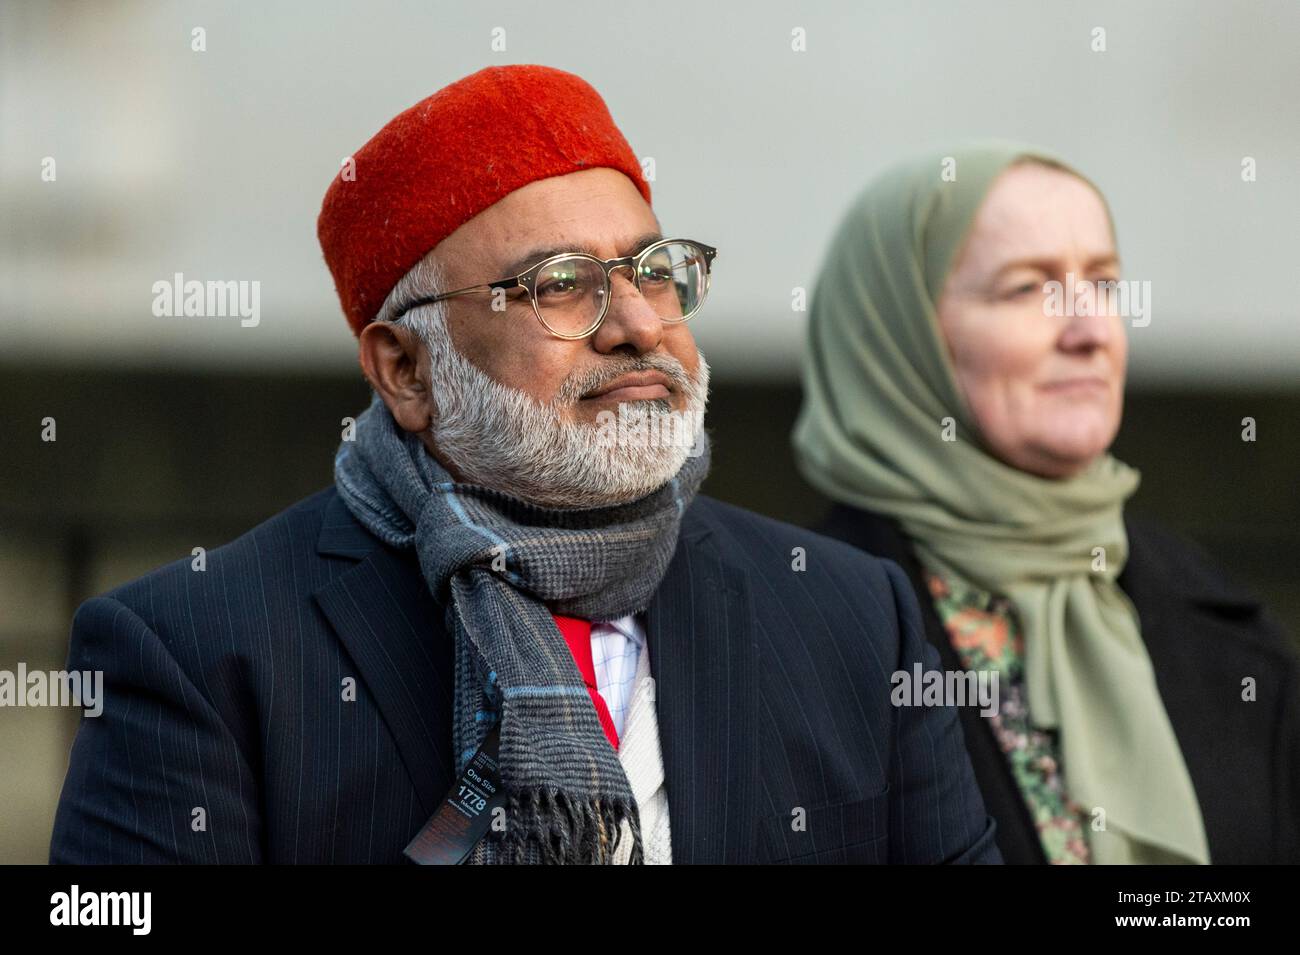 London, UK.  3 December 2023. (L) Imam Monawar Hussain, Founder of The Oxford Foundation, at a ‘Building Bridges for Humanity’ vigil outside Downing Street allowing them ‘to speak out against both antisemitism and Muslim hate’ according to organisers.  In an event supported by the Together for Humanity movement, attendees include bereaved families who have lost loved ones in the Israel Hamas conflict.   Credit: Stephen Chung / Alamy Live News Stock Photo